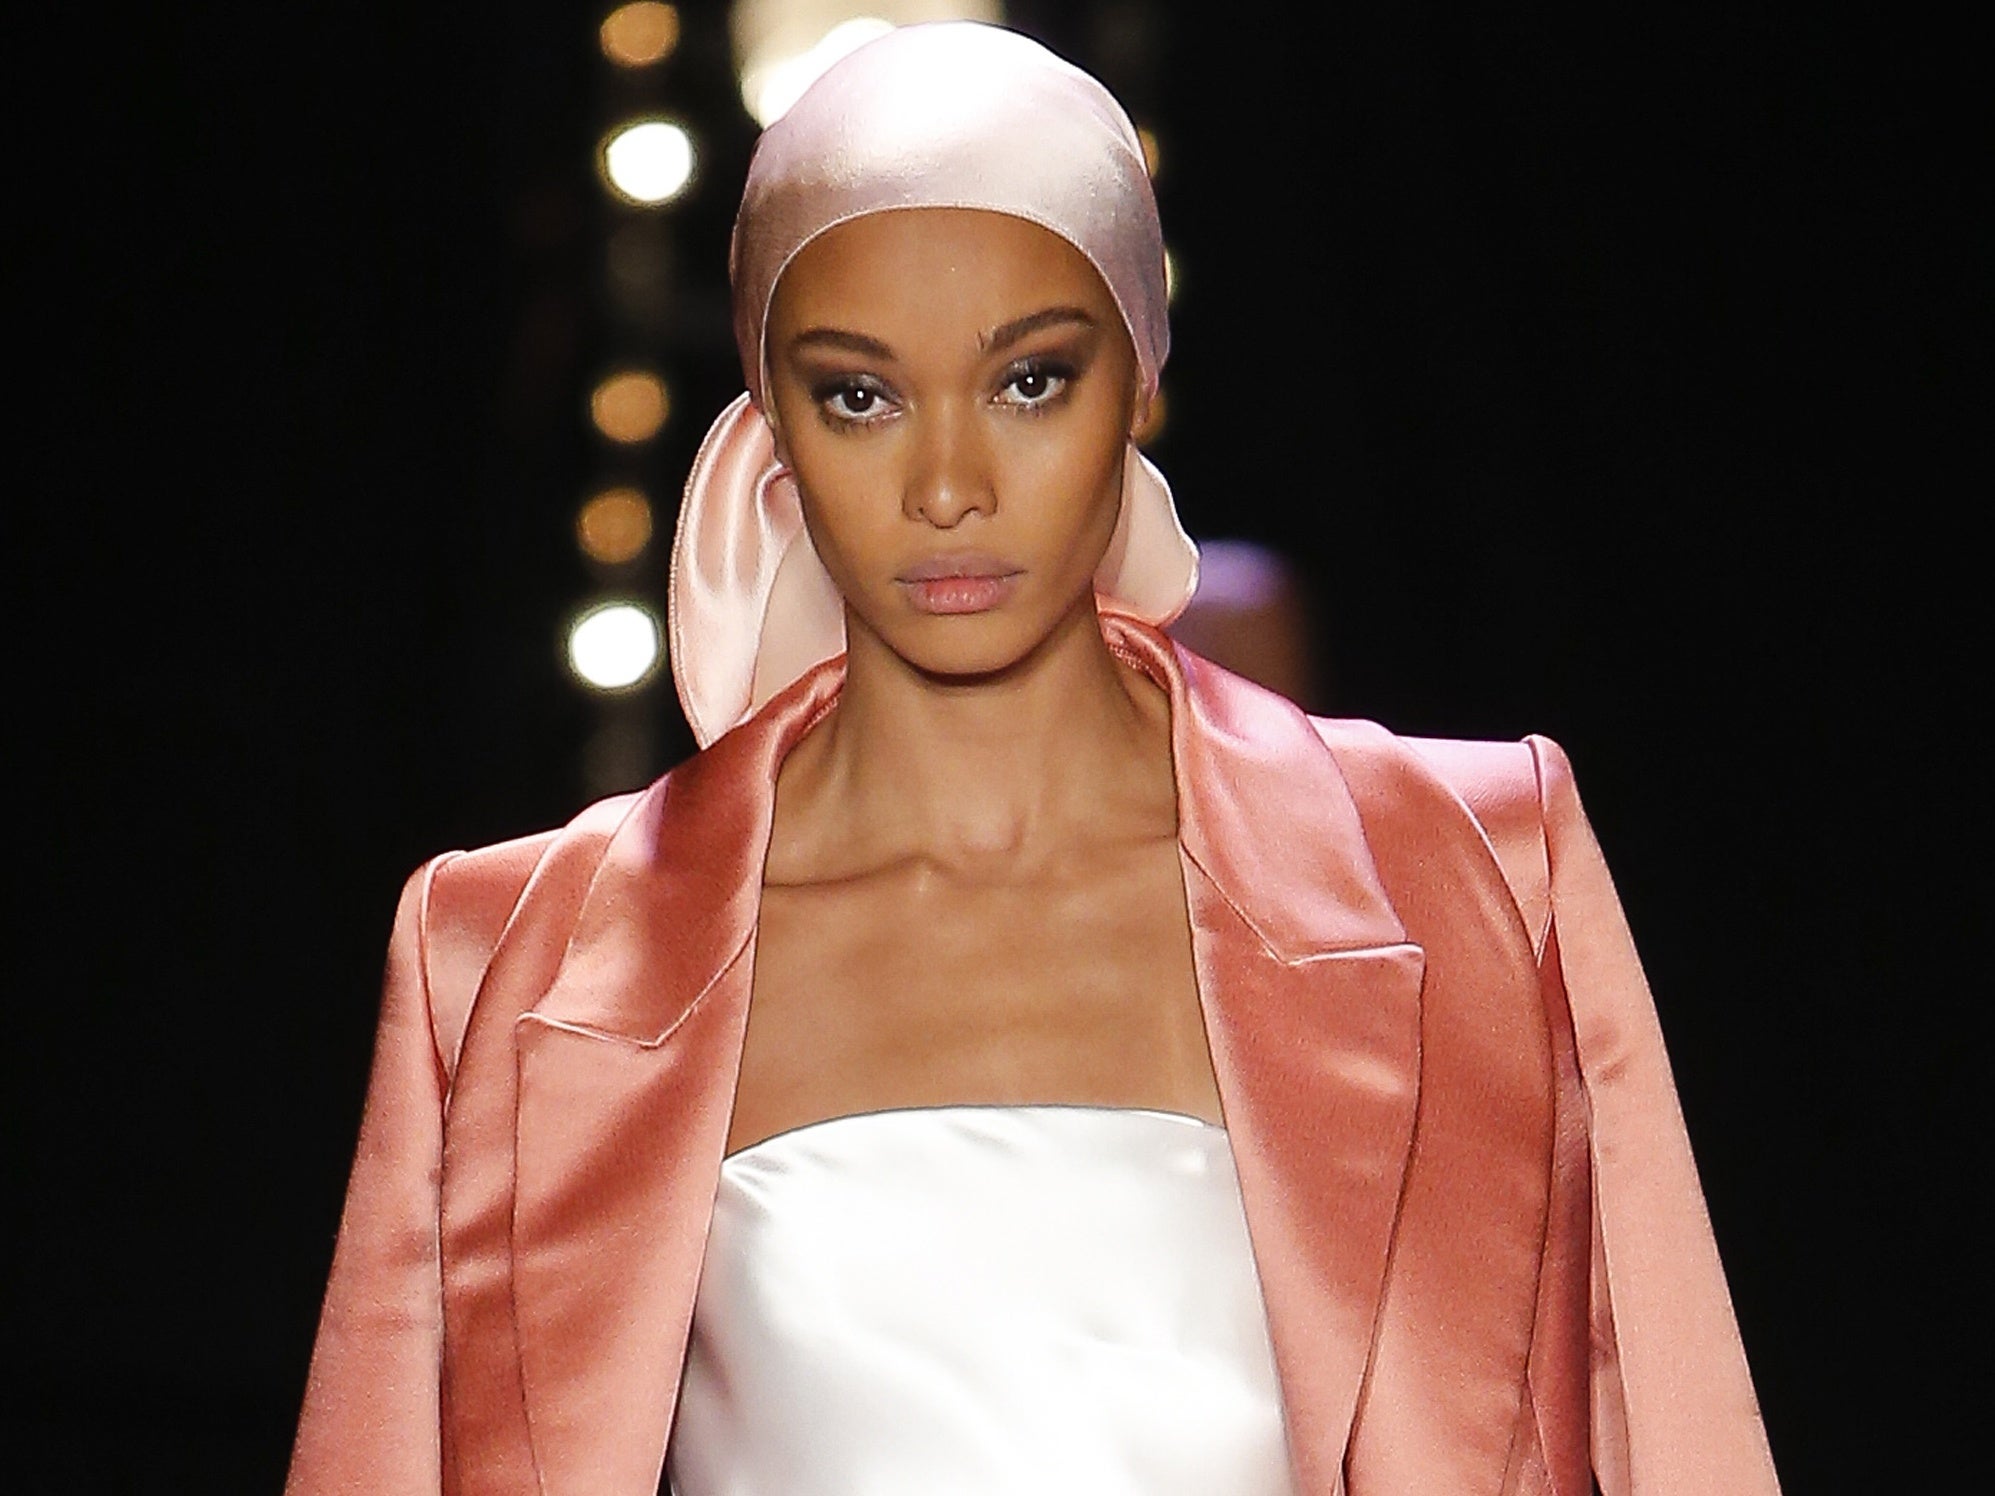 NYFW: Brandon Maxwell's Durag and Cornrow-Adorned Models Usher In A New Era Of Cool for the Label